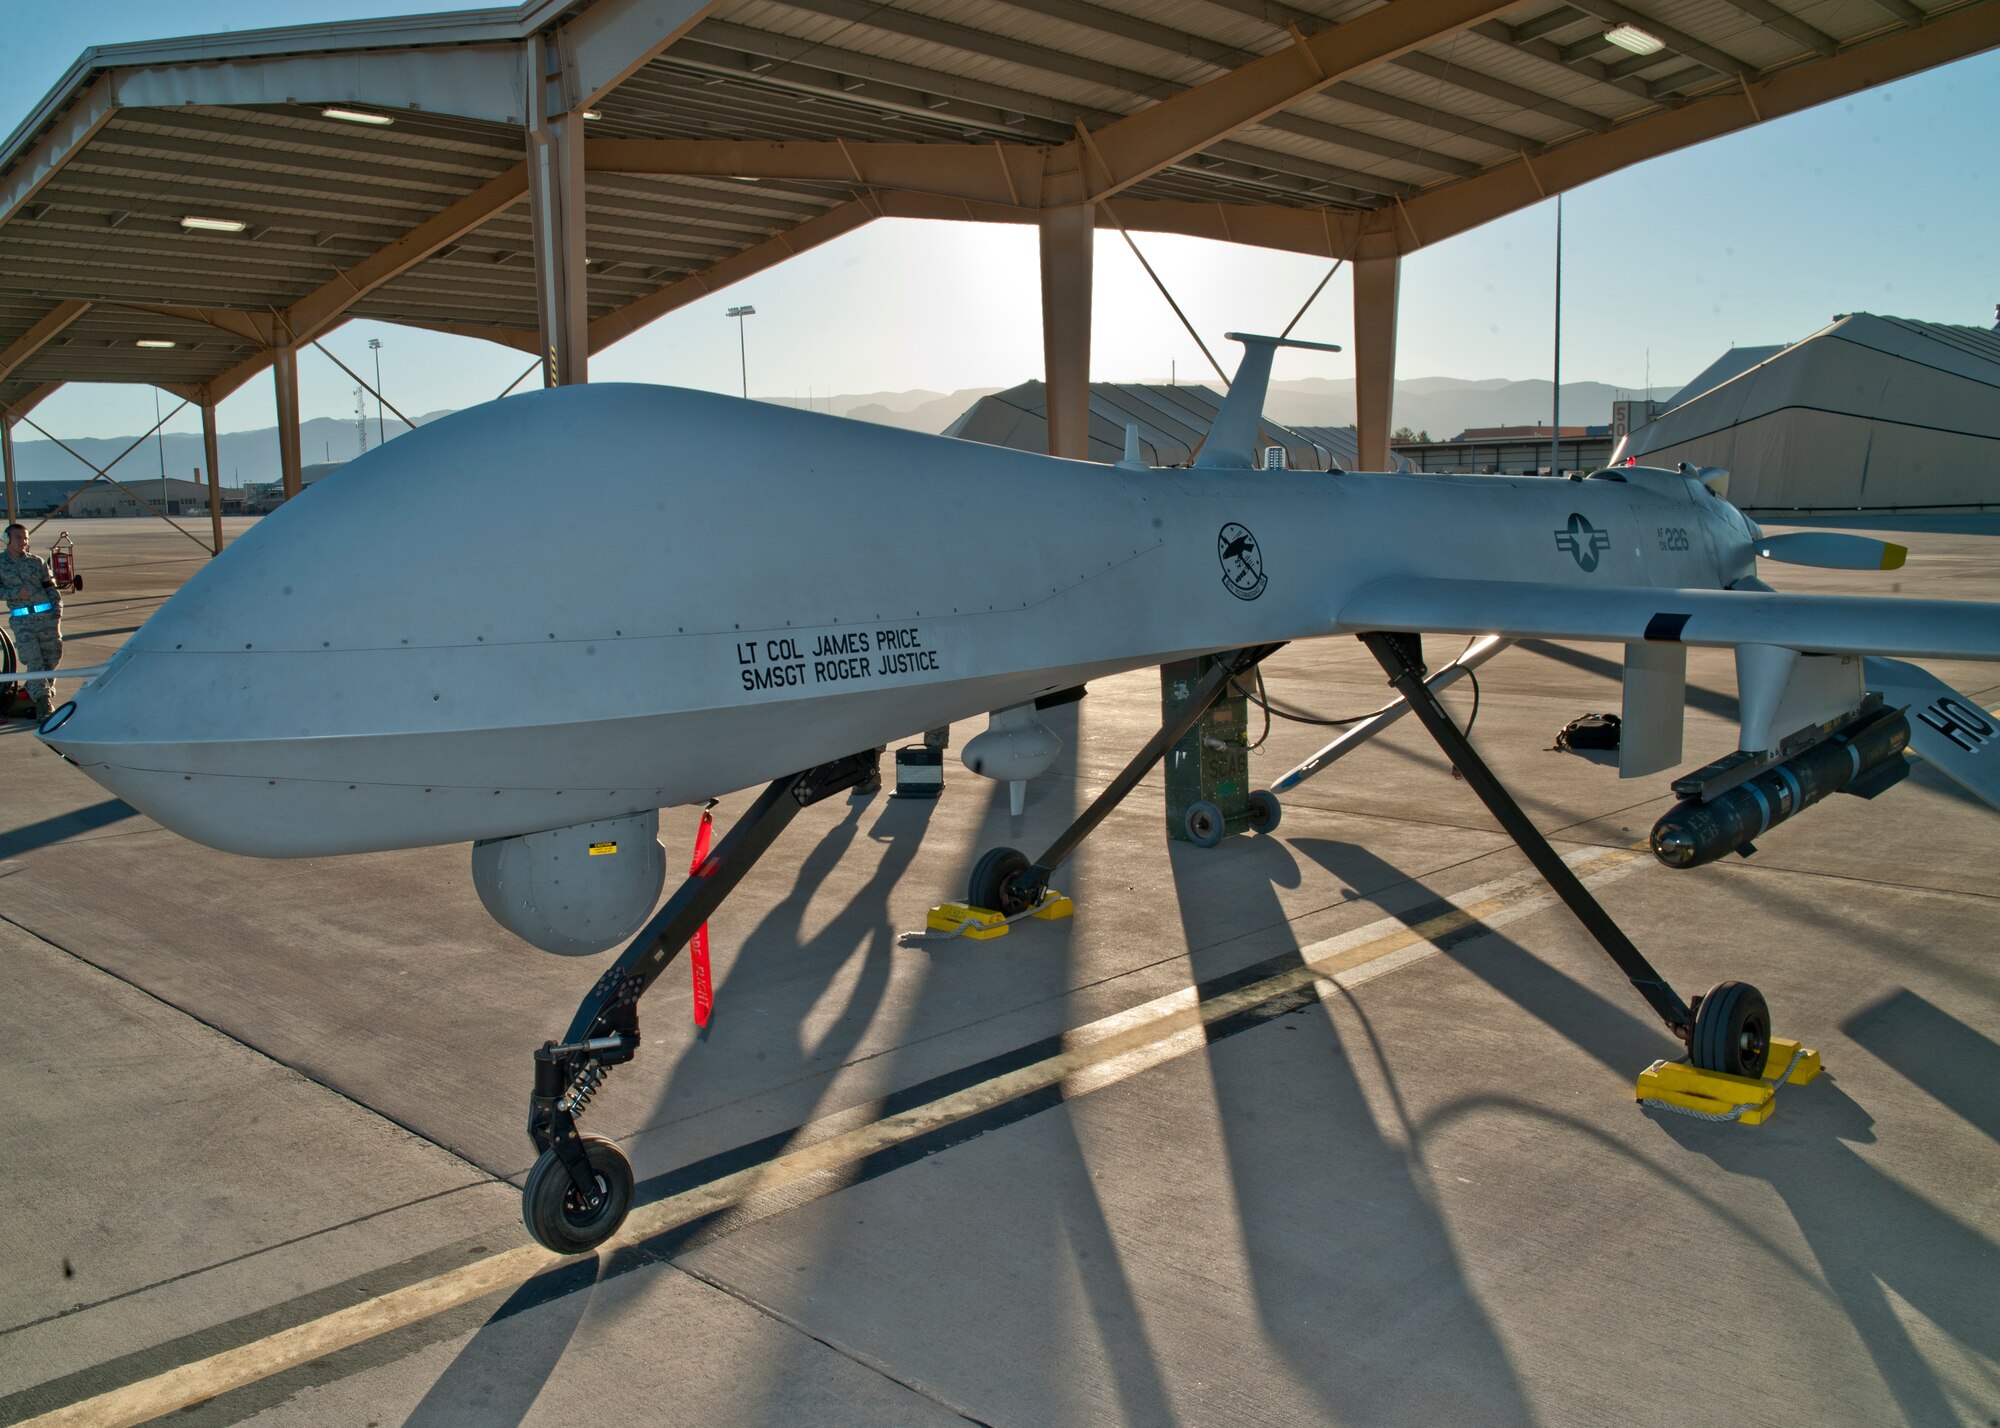 An MQ-1 Predator is docked under a sun shade as it is prepared for take-off at Holloman Air Force Base, N.M., Sept. 25.  The Predator’s primary functions are to fulfill reconnaissance and forward observation roles.  In addition to the pilot and sensor operator who control the aircraft from a ground control station, flying an MQ-1 requires a culmination of efforts from various squadrons. (U.S. Air Force photo by Airman 1st Class Daniel E. Liddicoet/Released)